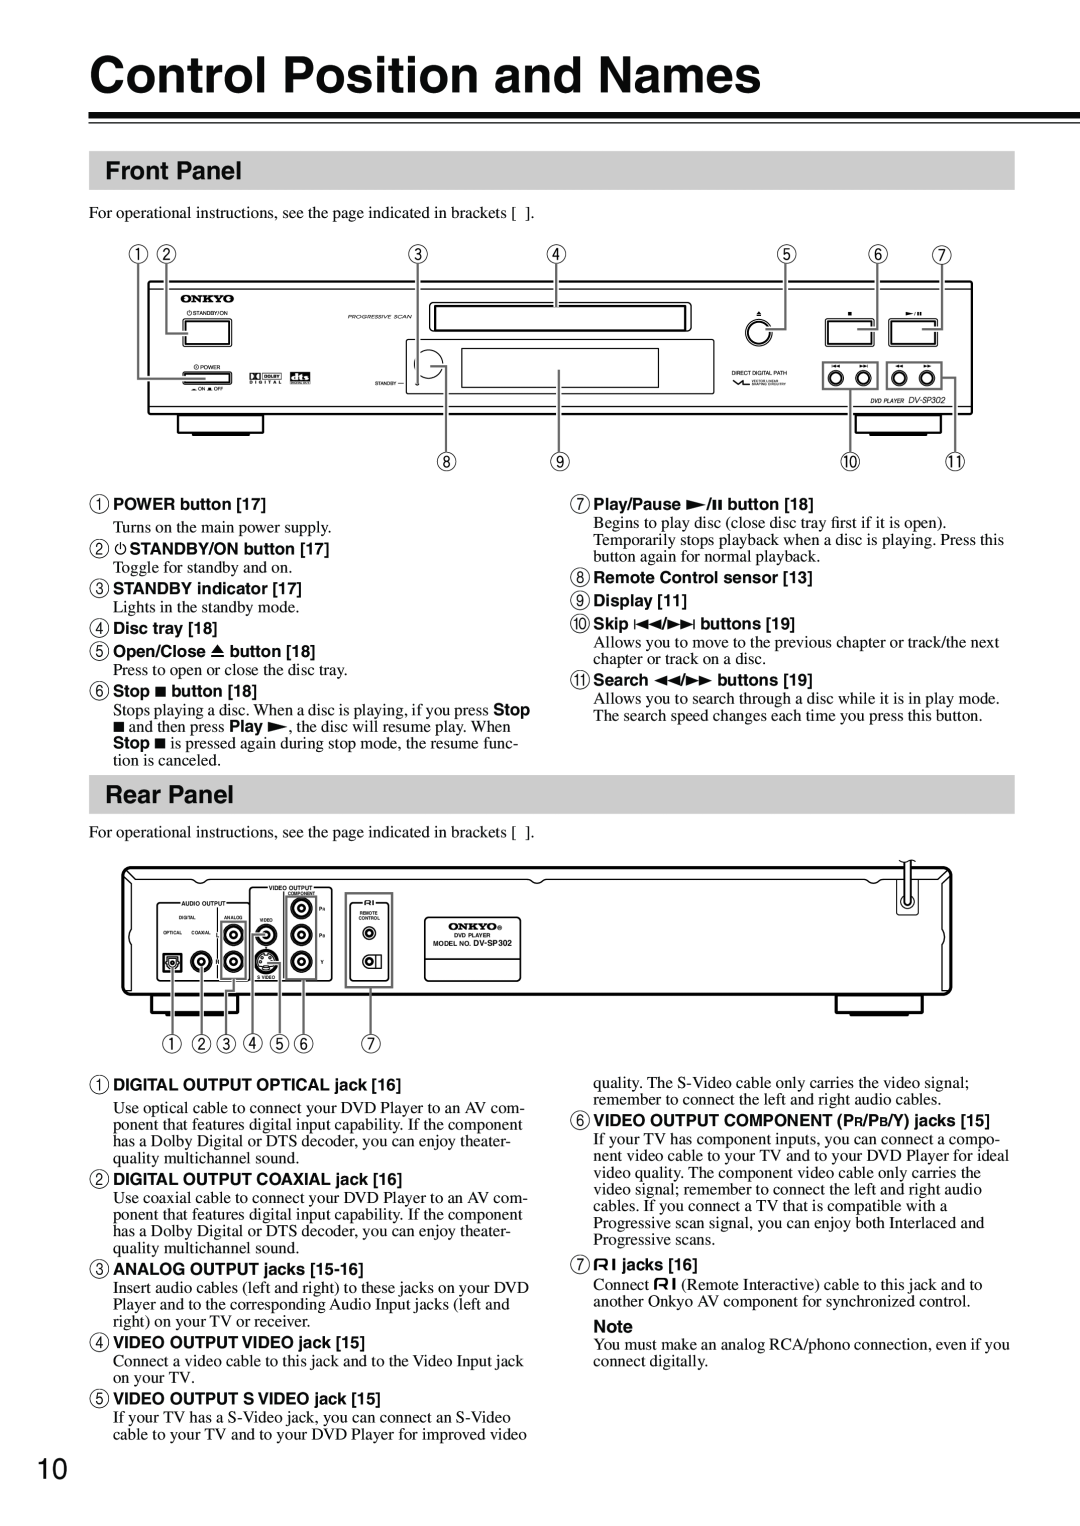 Onkyo DV-SP302 instruction manual Control Position and Names, Front Panel, Rear Panel 